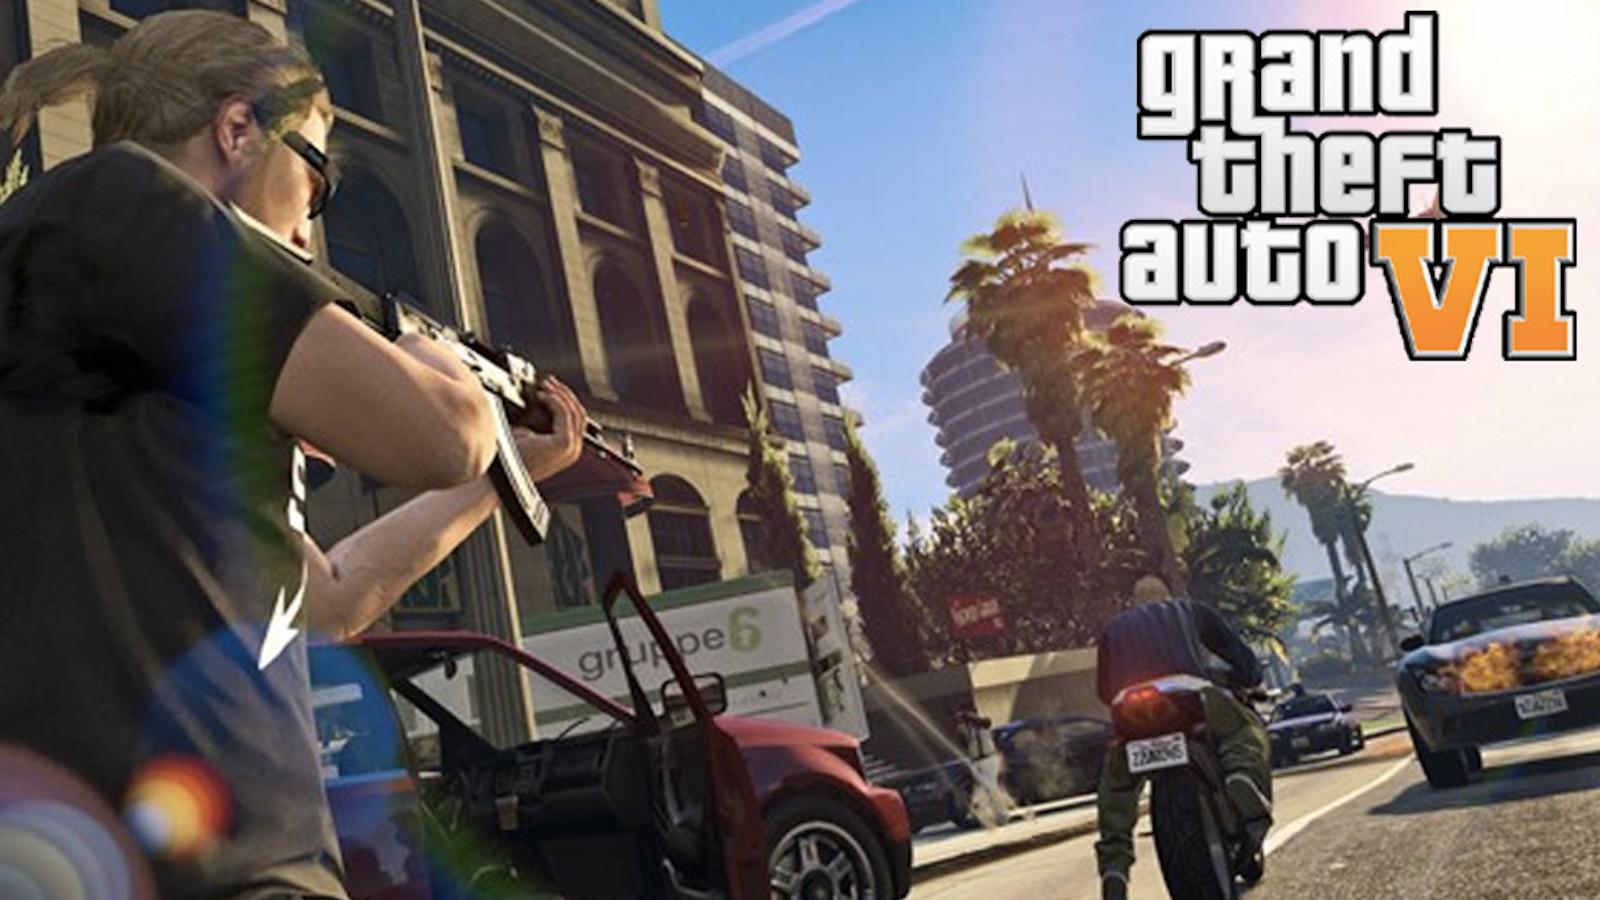 Gta 6 Gameplay Leak – Latest News Information updated on May 14, 2023, Articles & Updates on Gta 6 Gameplay Leak, Photos & Videos